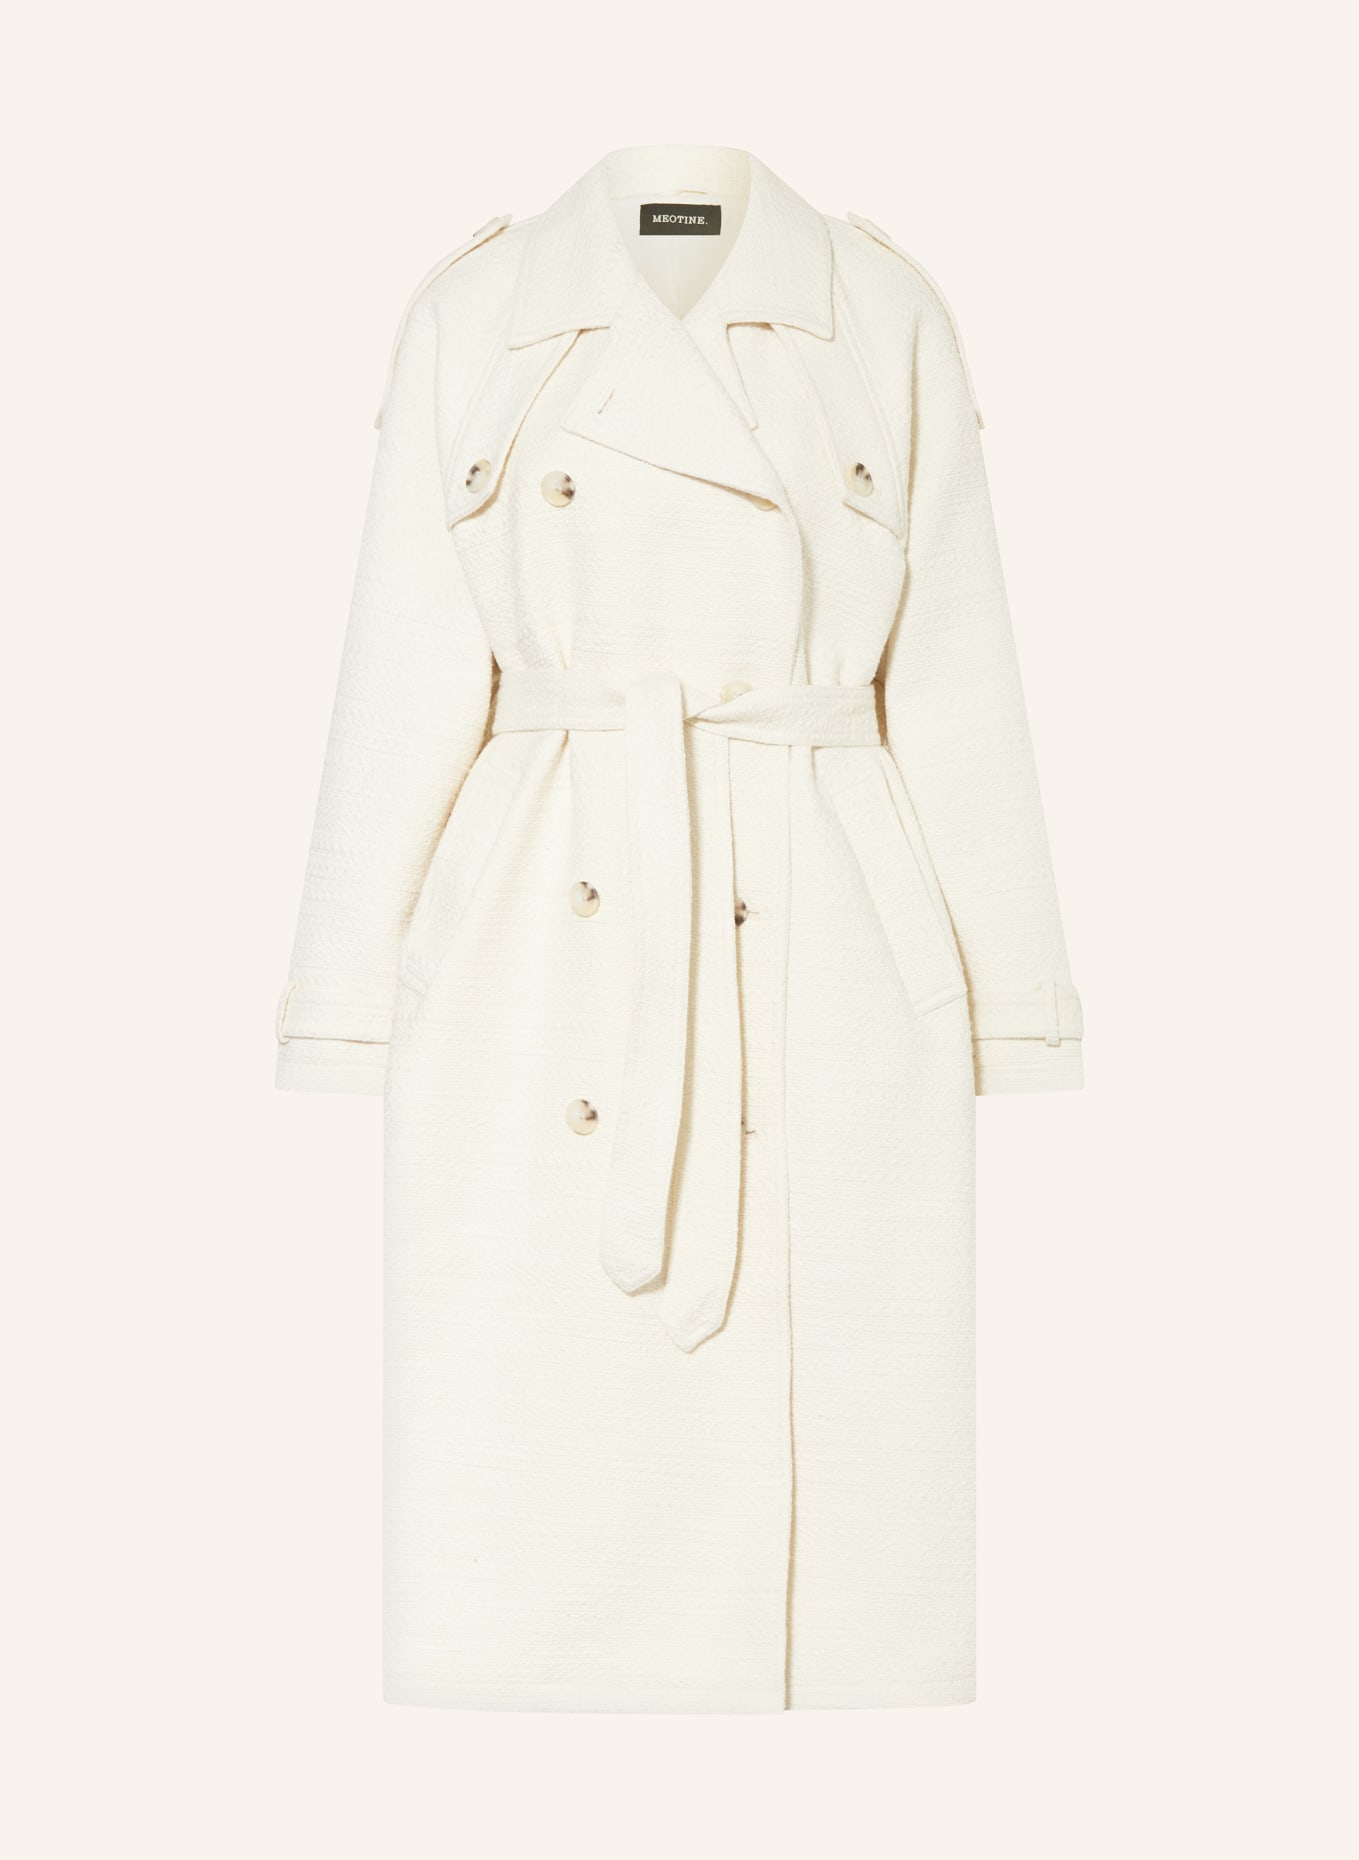 MEOTINE Trench coat BOBBY made of tweed, Color: CREAM (Image 1)